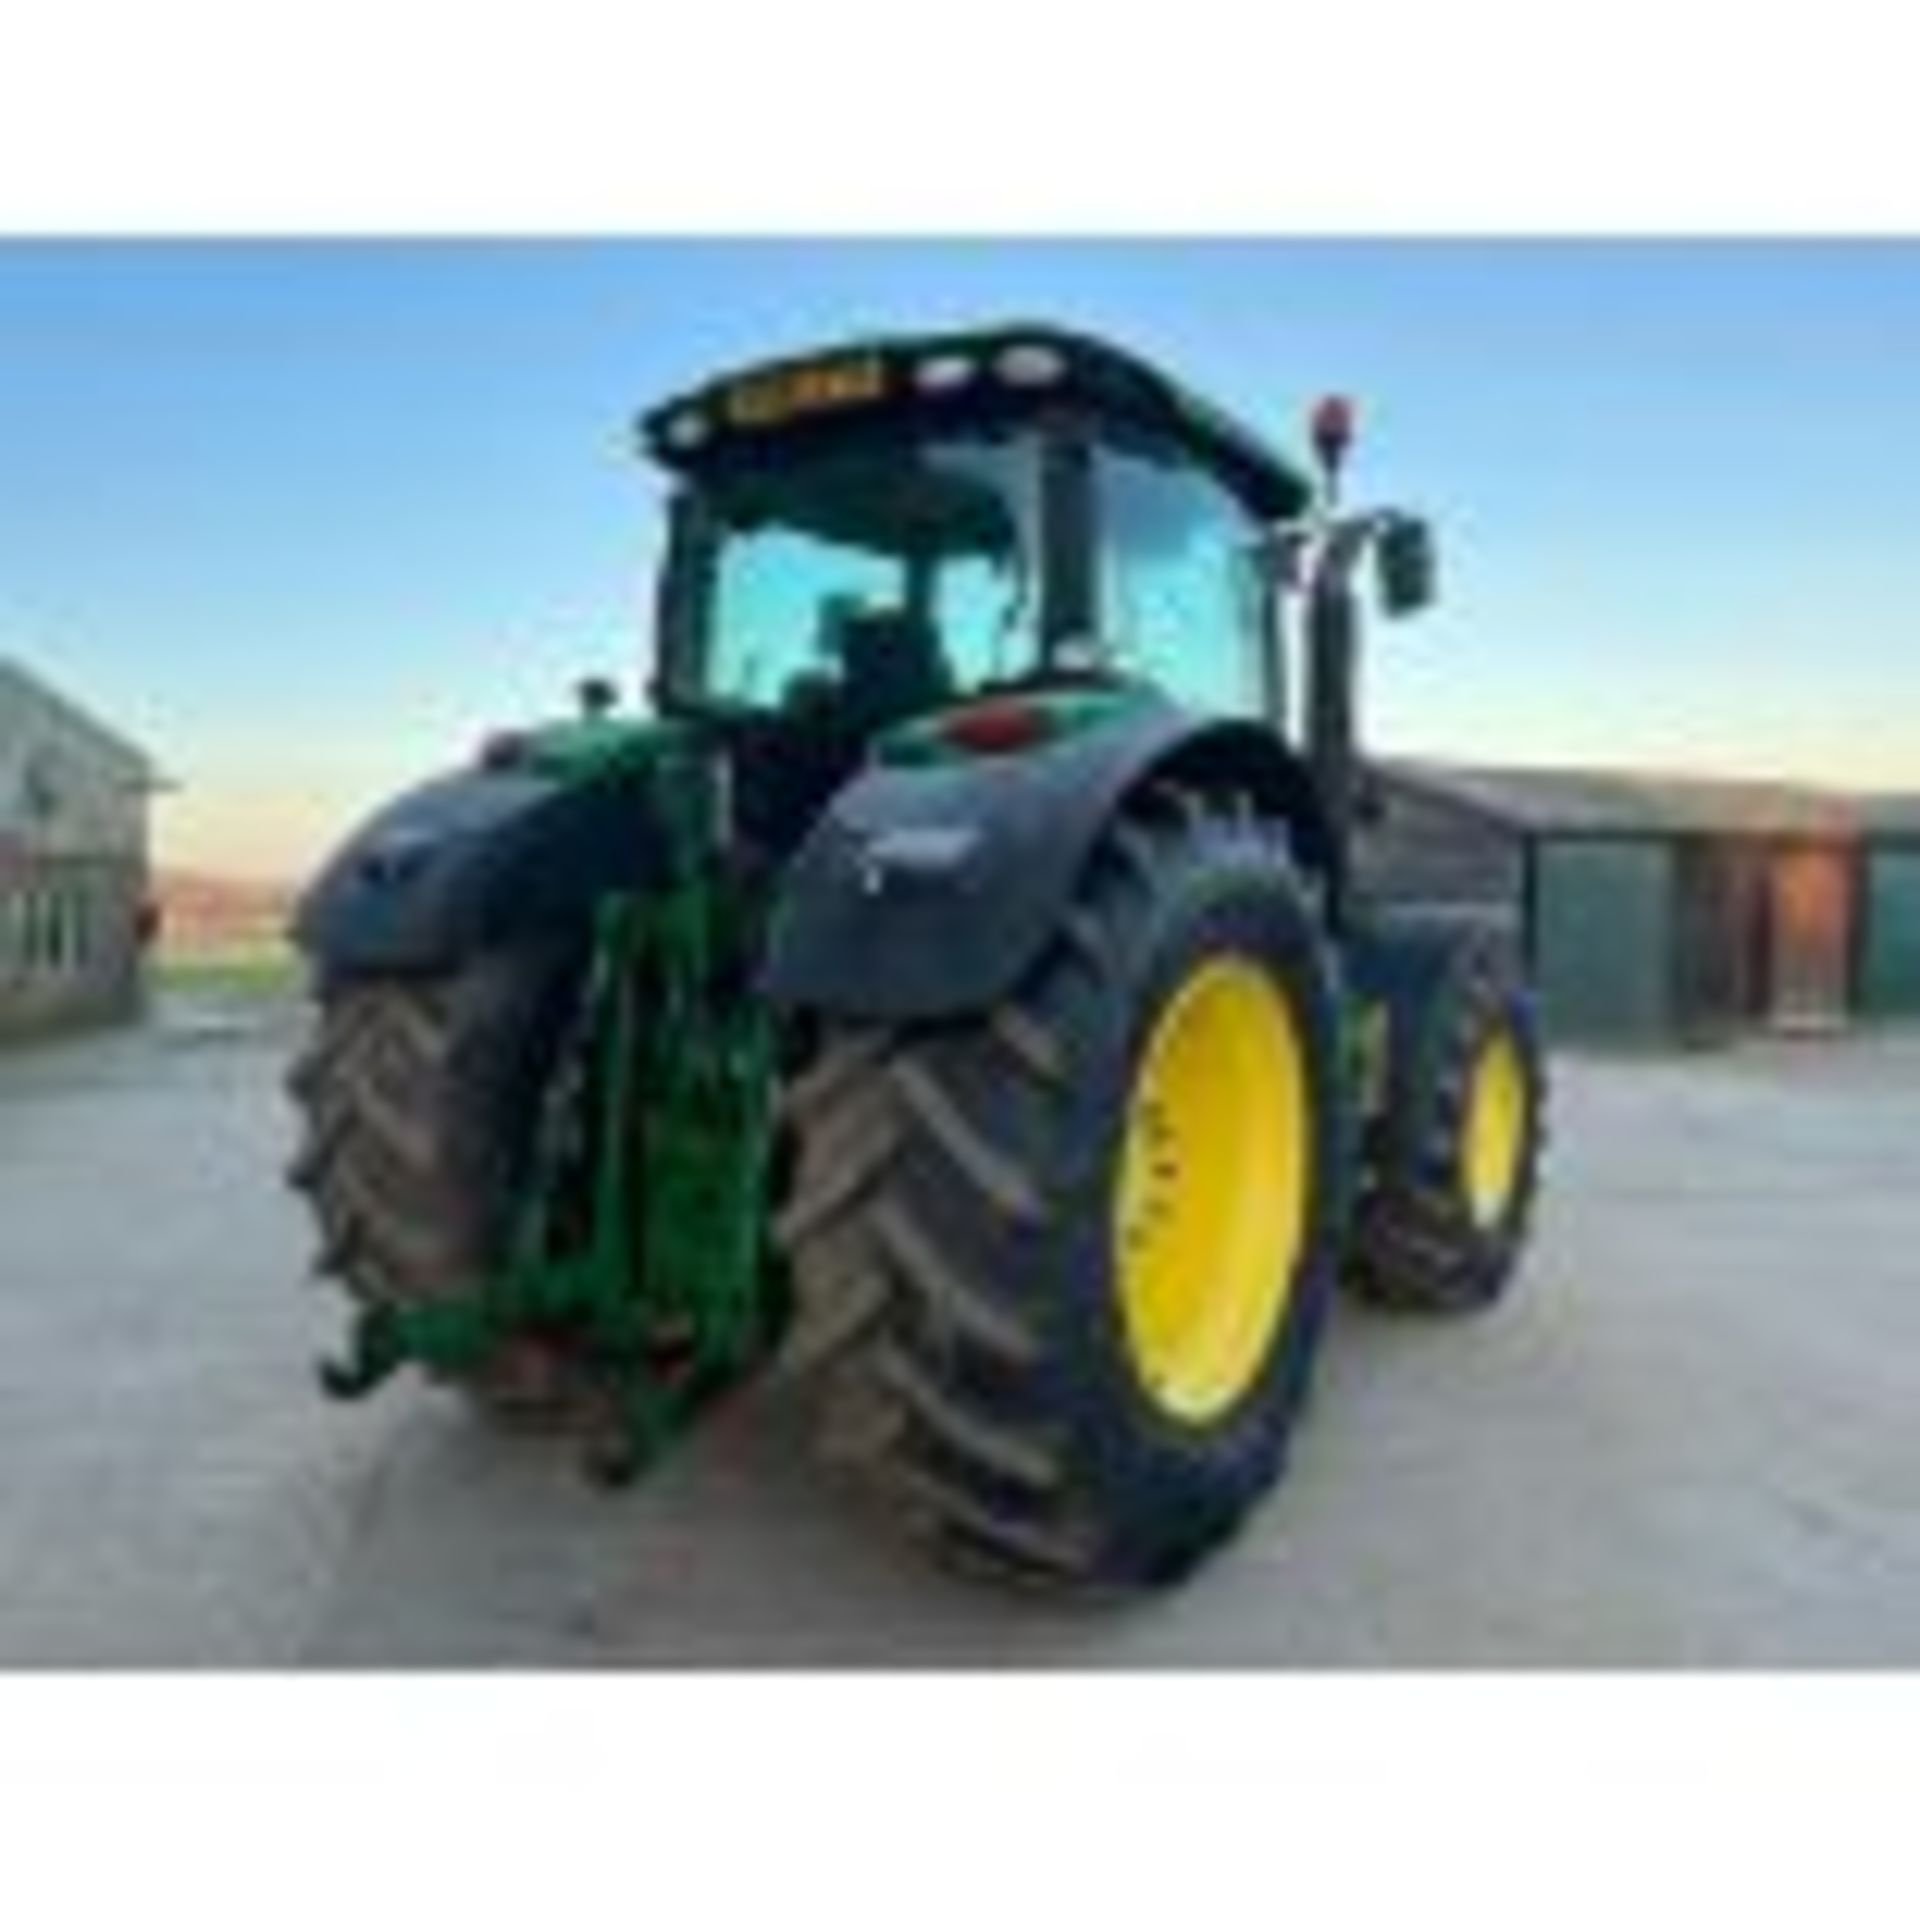 2013 John Deere 6210R 4wd Tractor, approx. 8136 Hours, Reg No. - Image 5 of 9